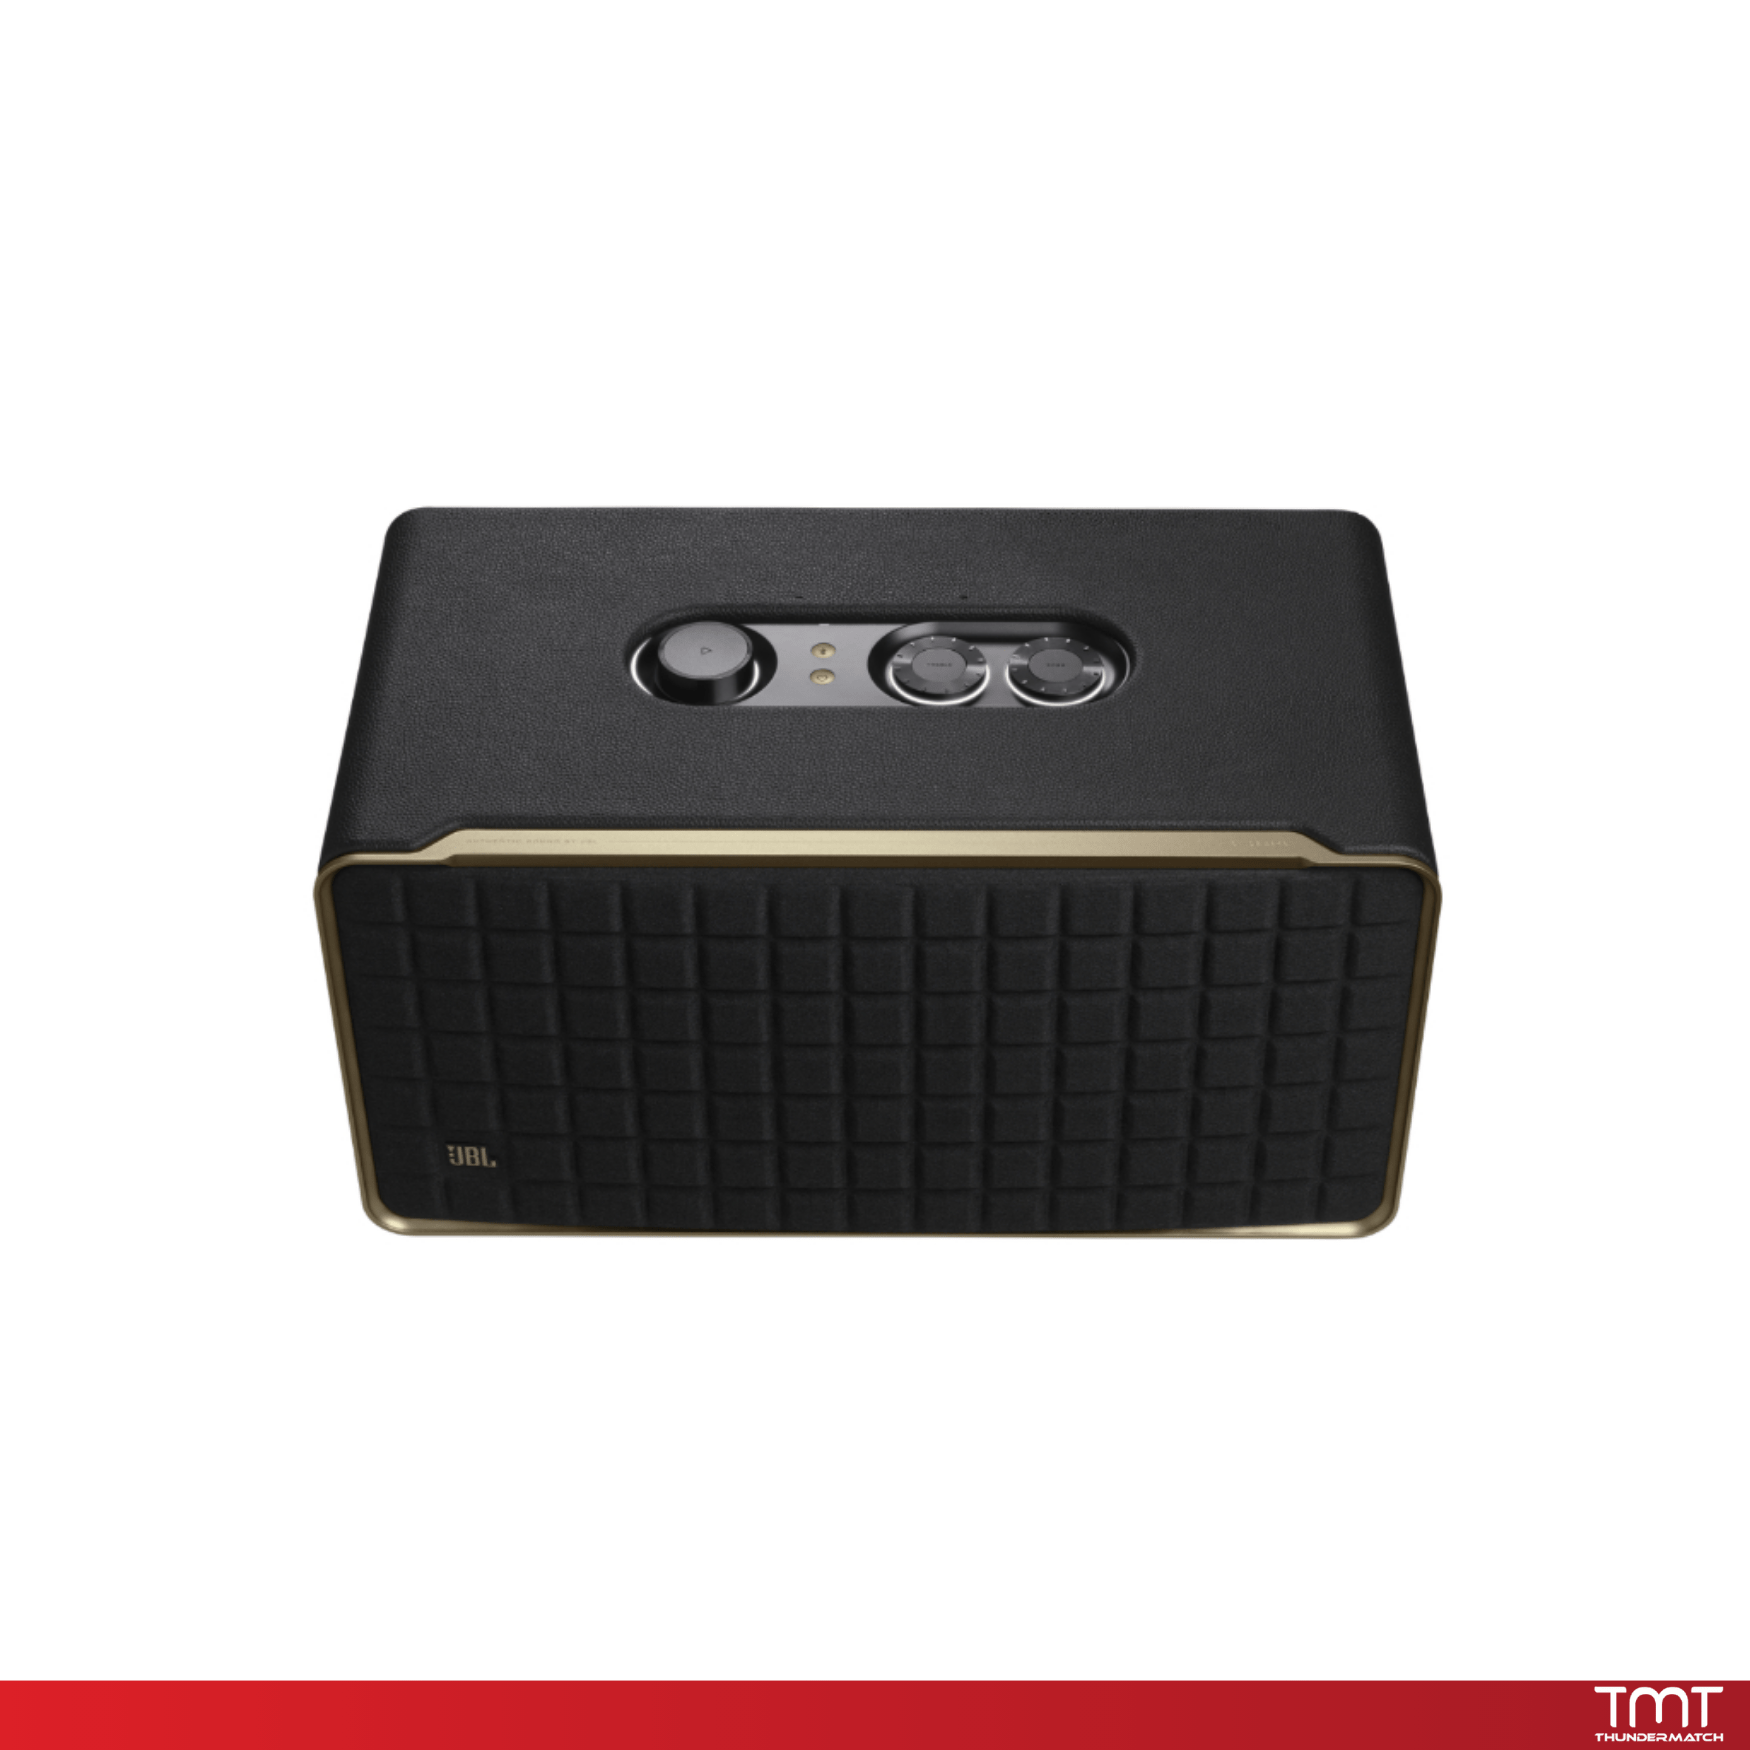 JBL AUTHENTICS 500 Hi-fidelity smart home speaker with Wi-Fi, Bluetooth and Voice Assistants with retro design.